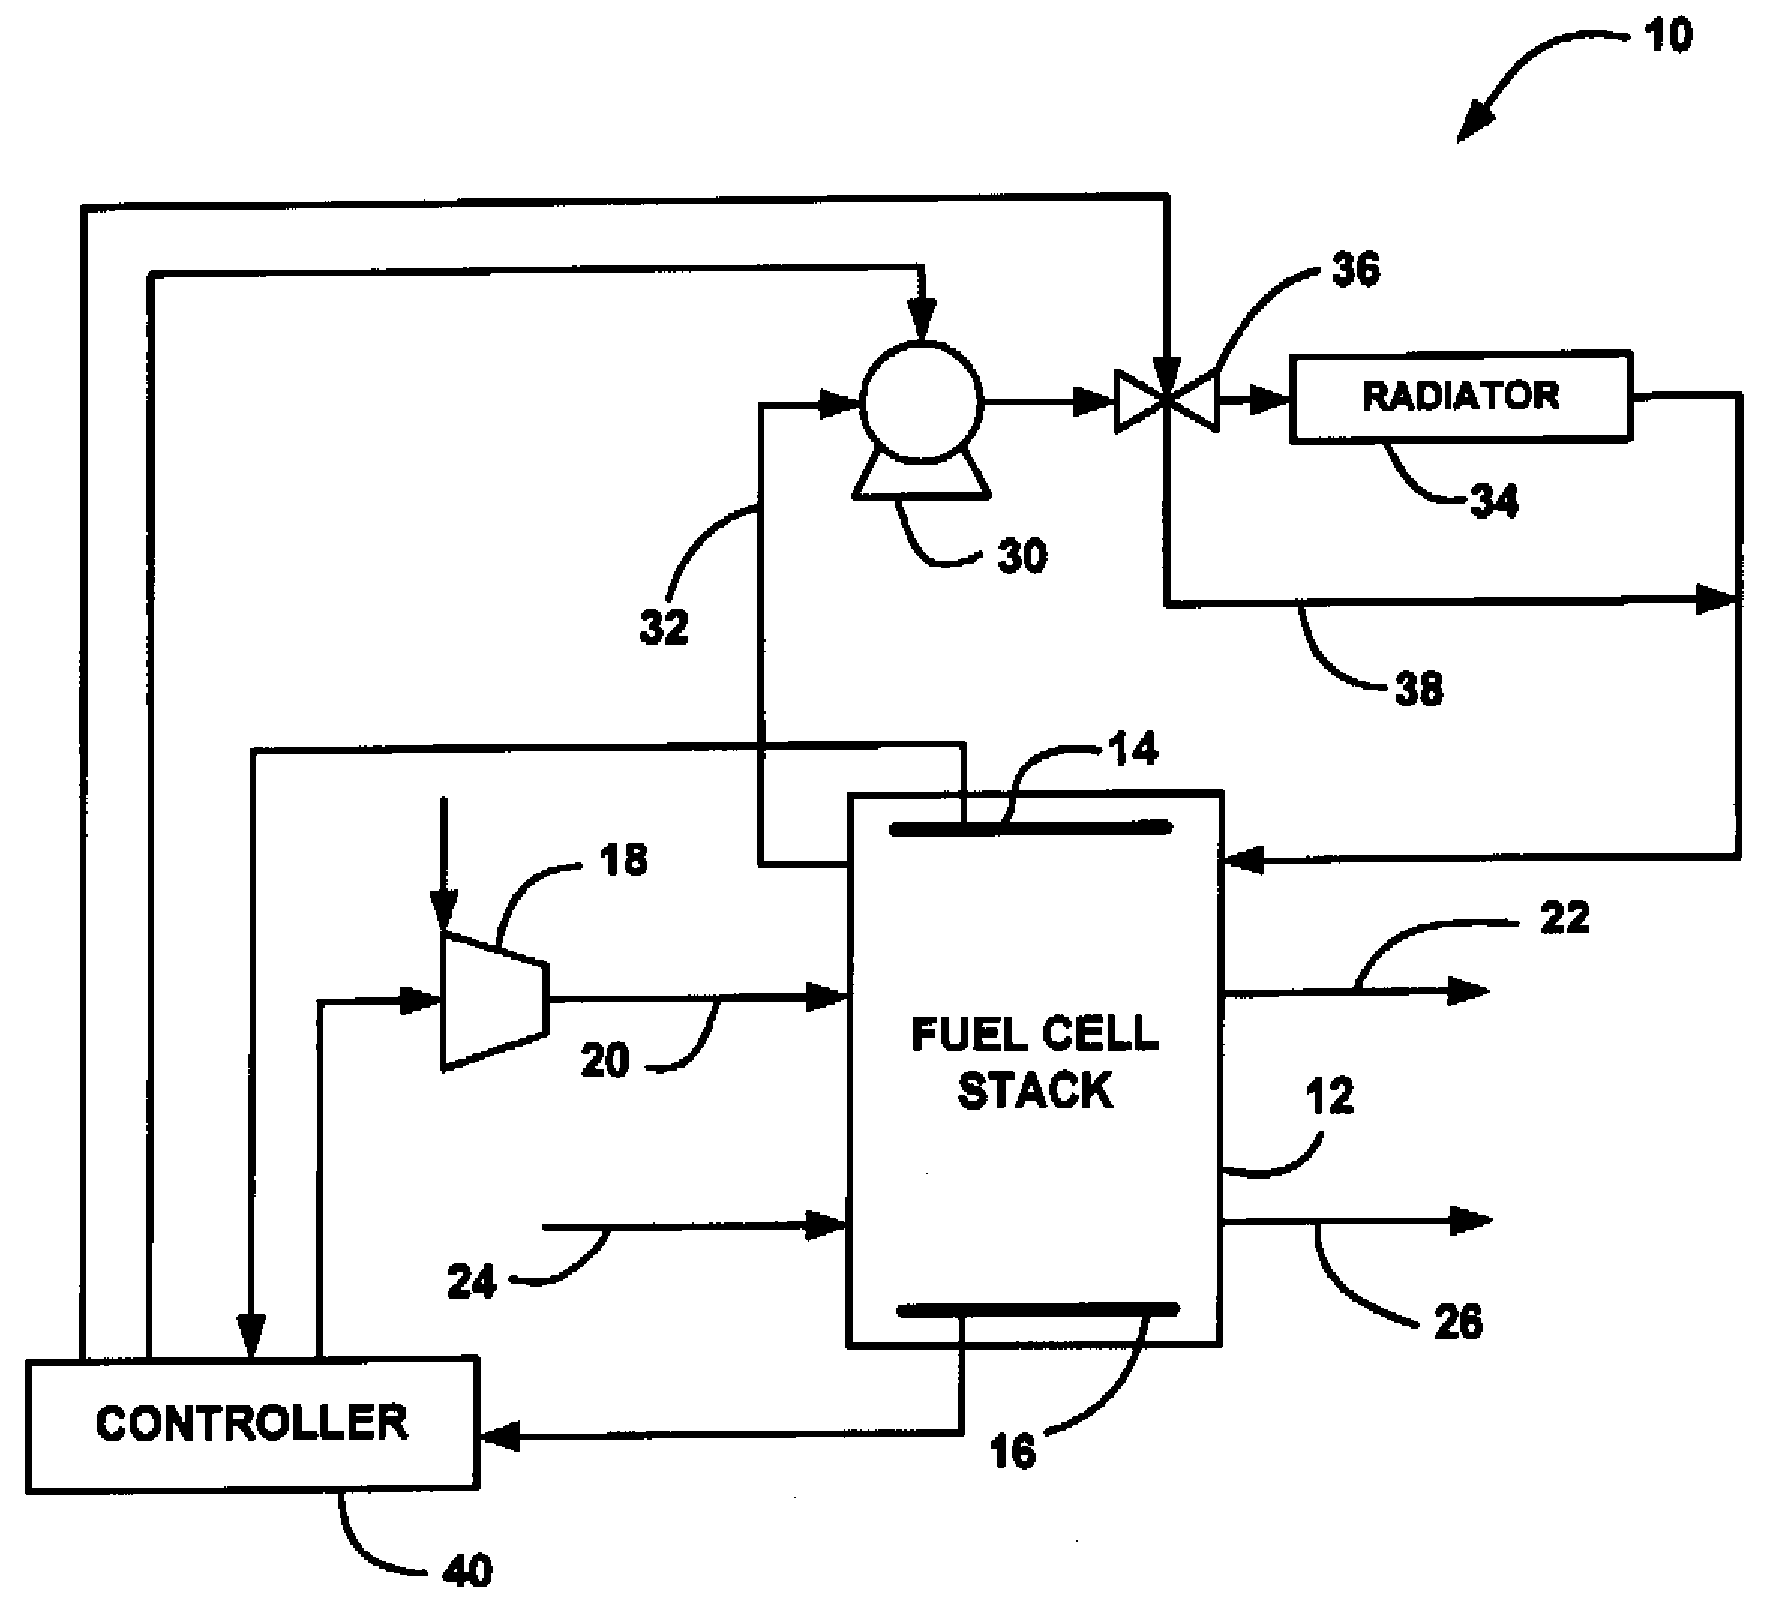 Method for Improving FCS Reliability After End Cell Heater Failure